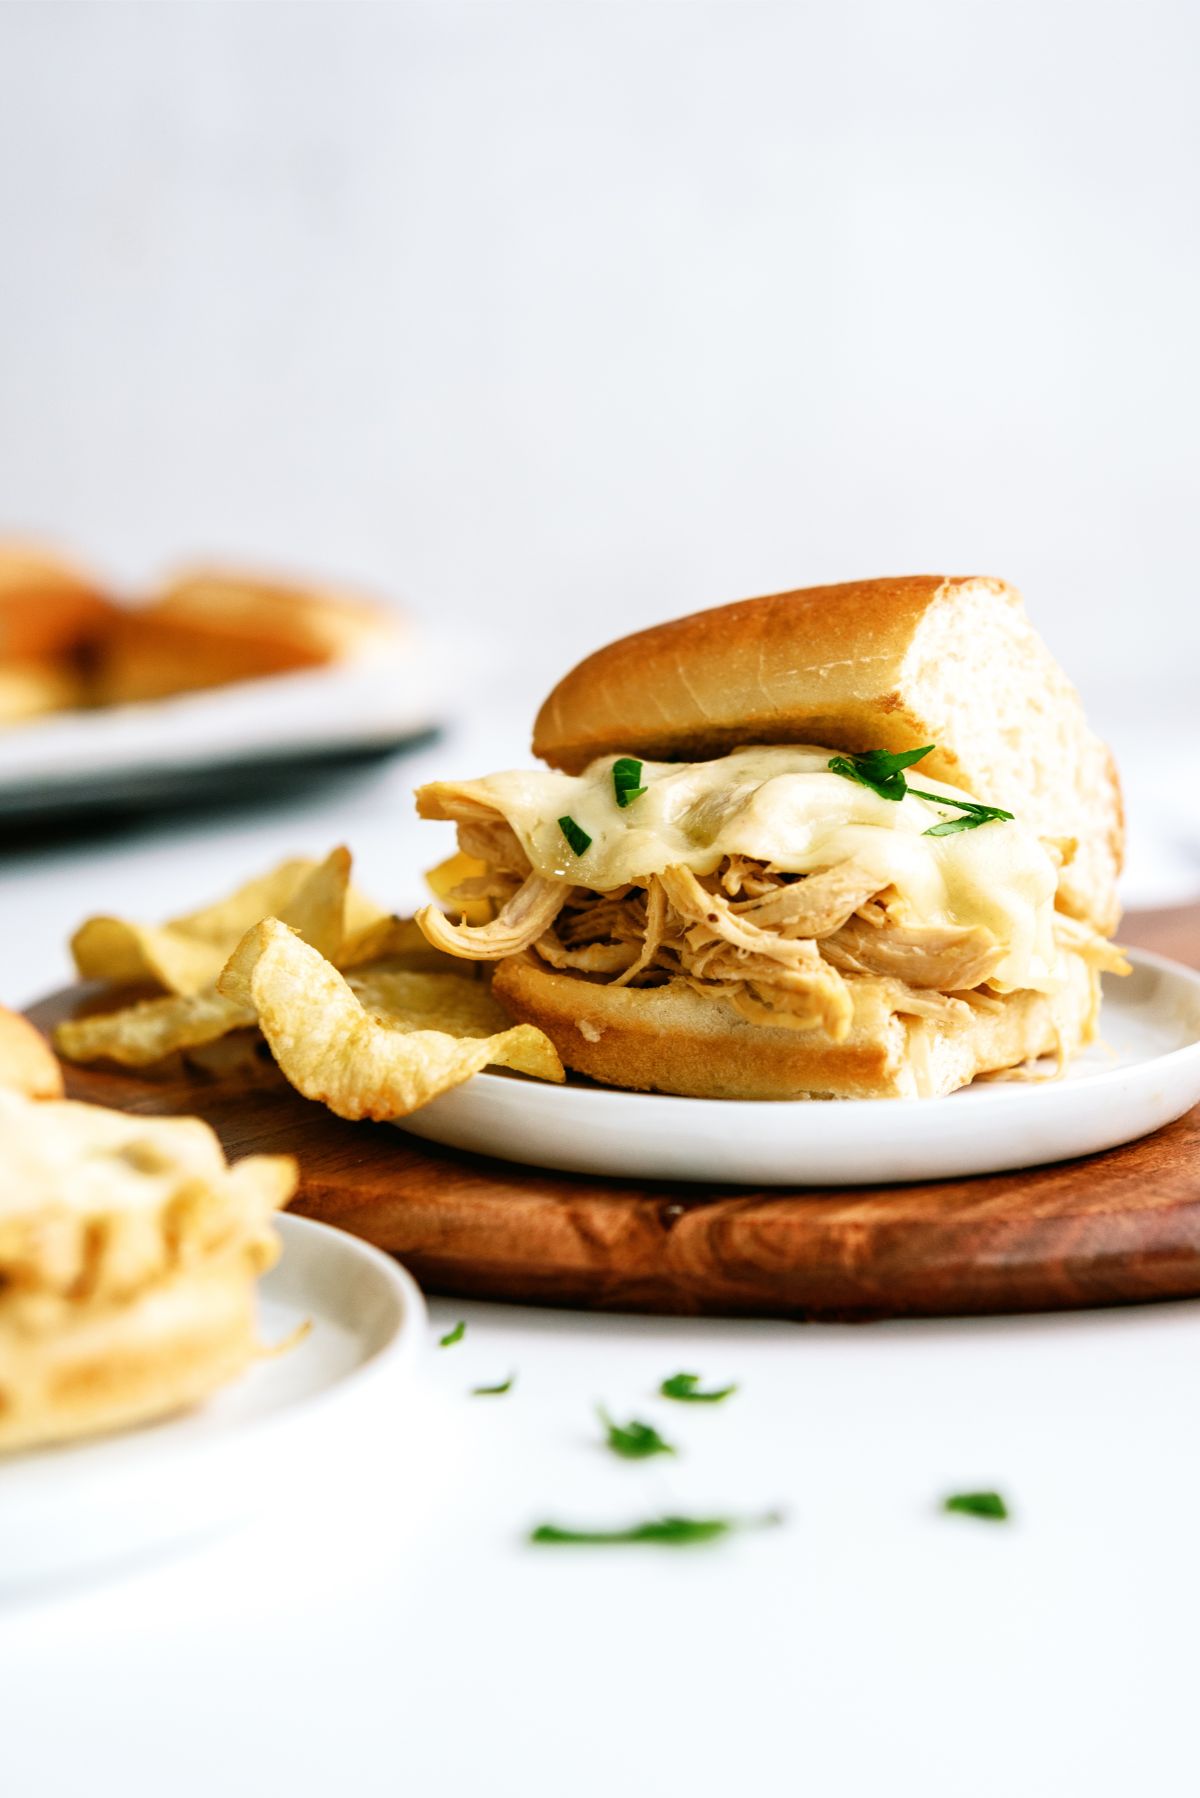 Instant Pot Chicken French Dip Sandwich on a plate with chips